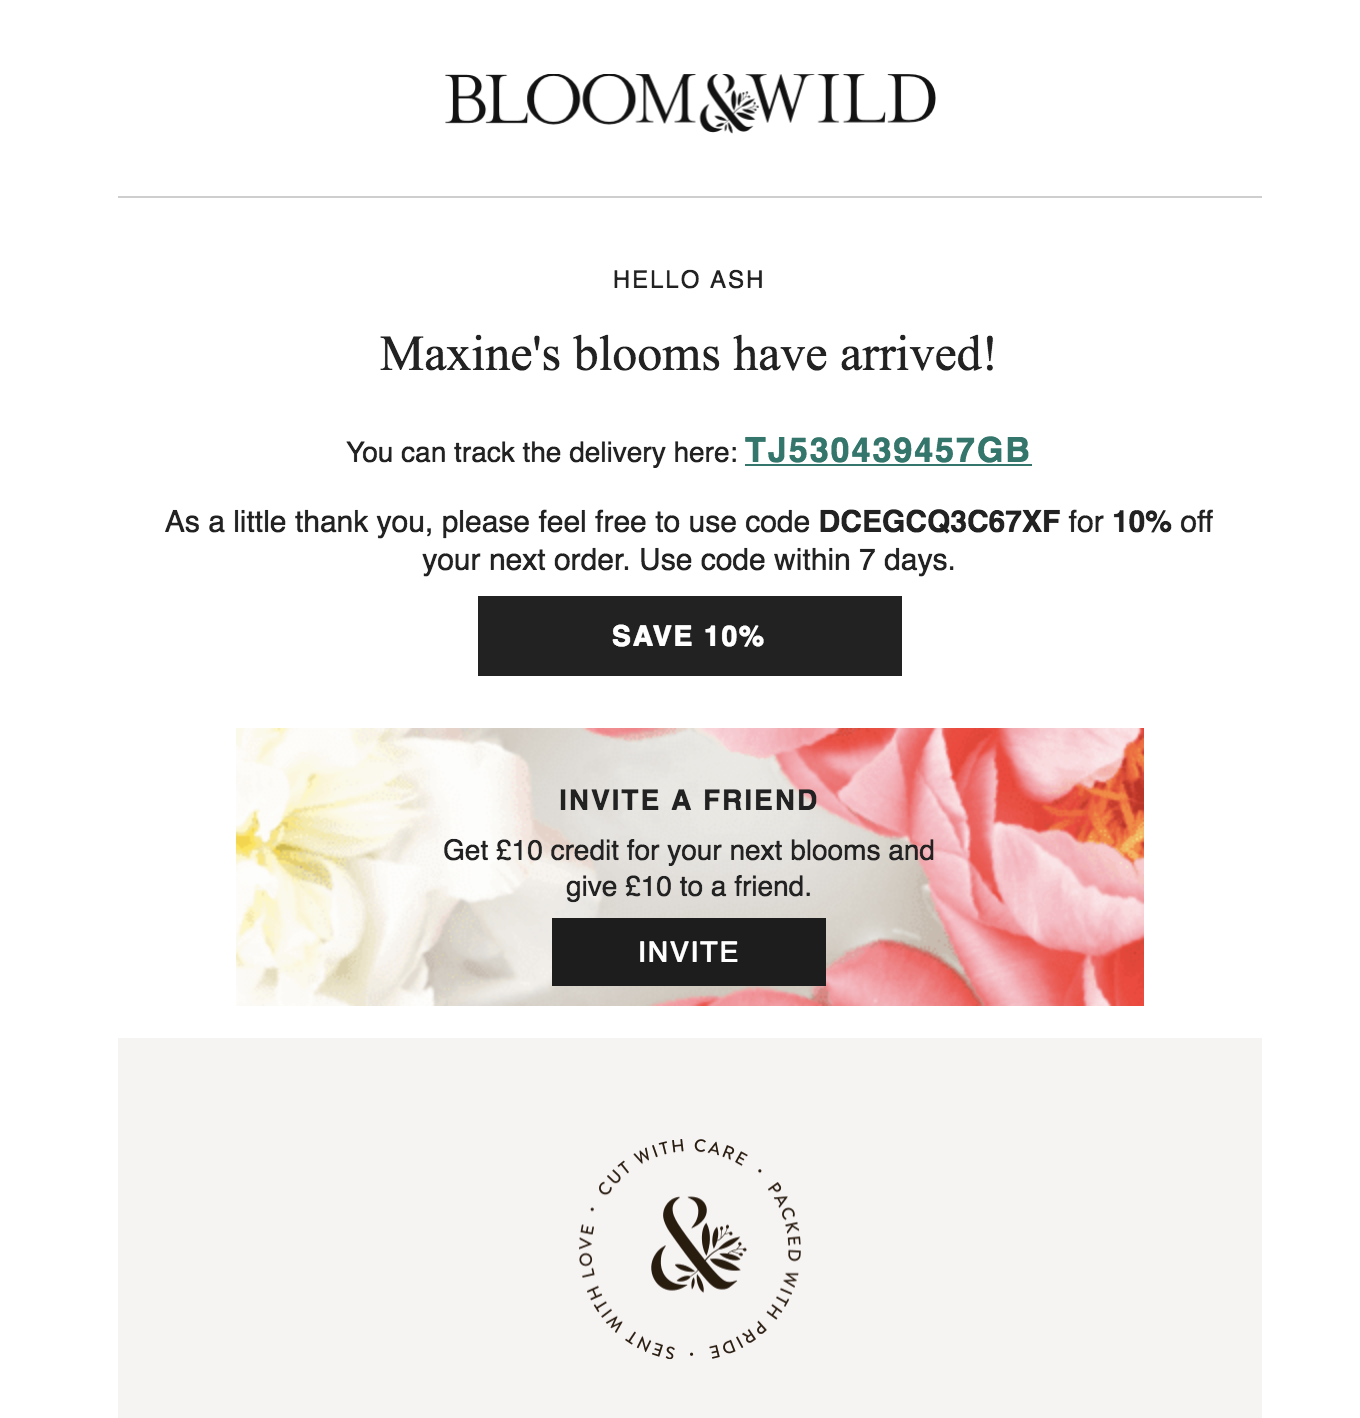 Screenshot showing an email by Bloom & Wild